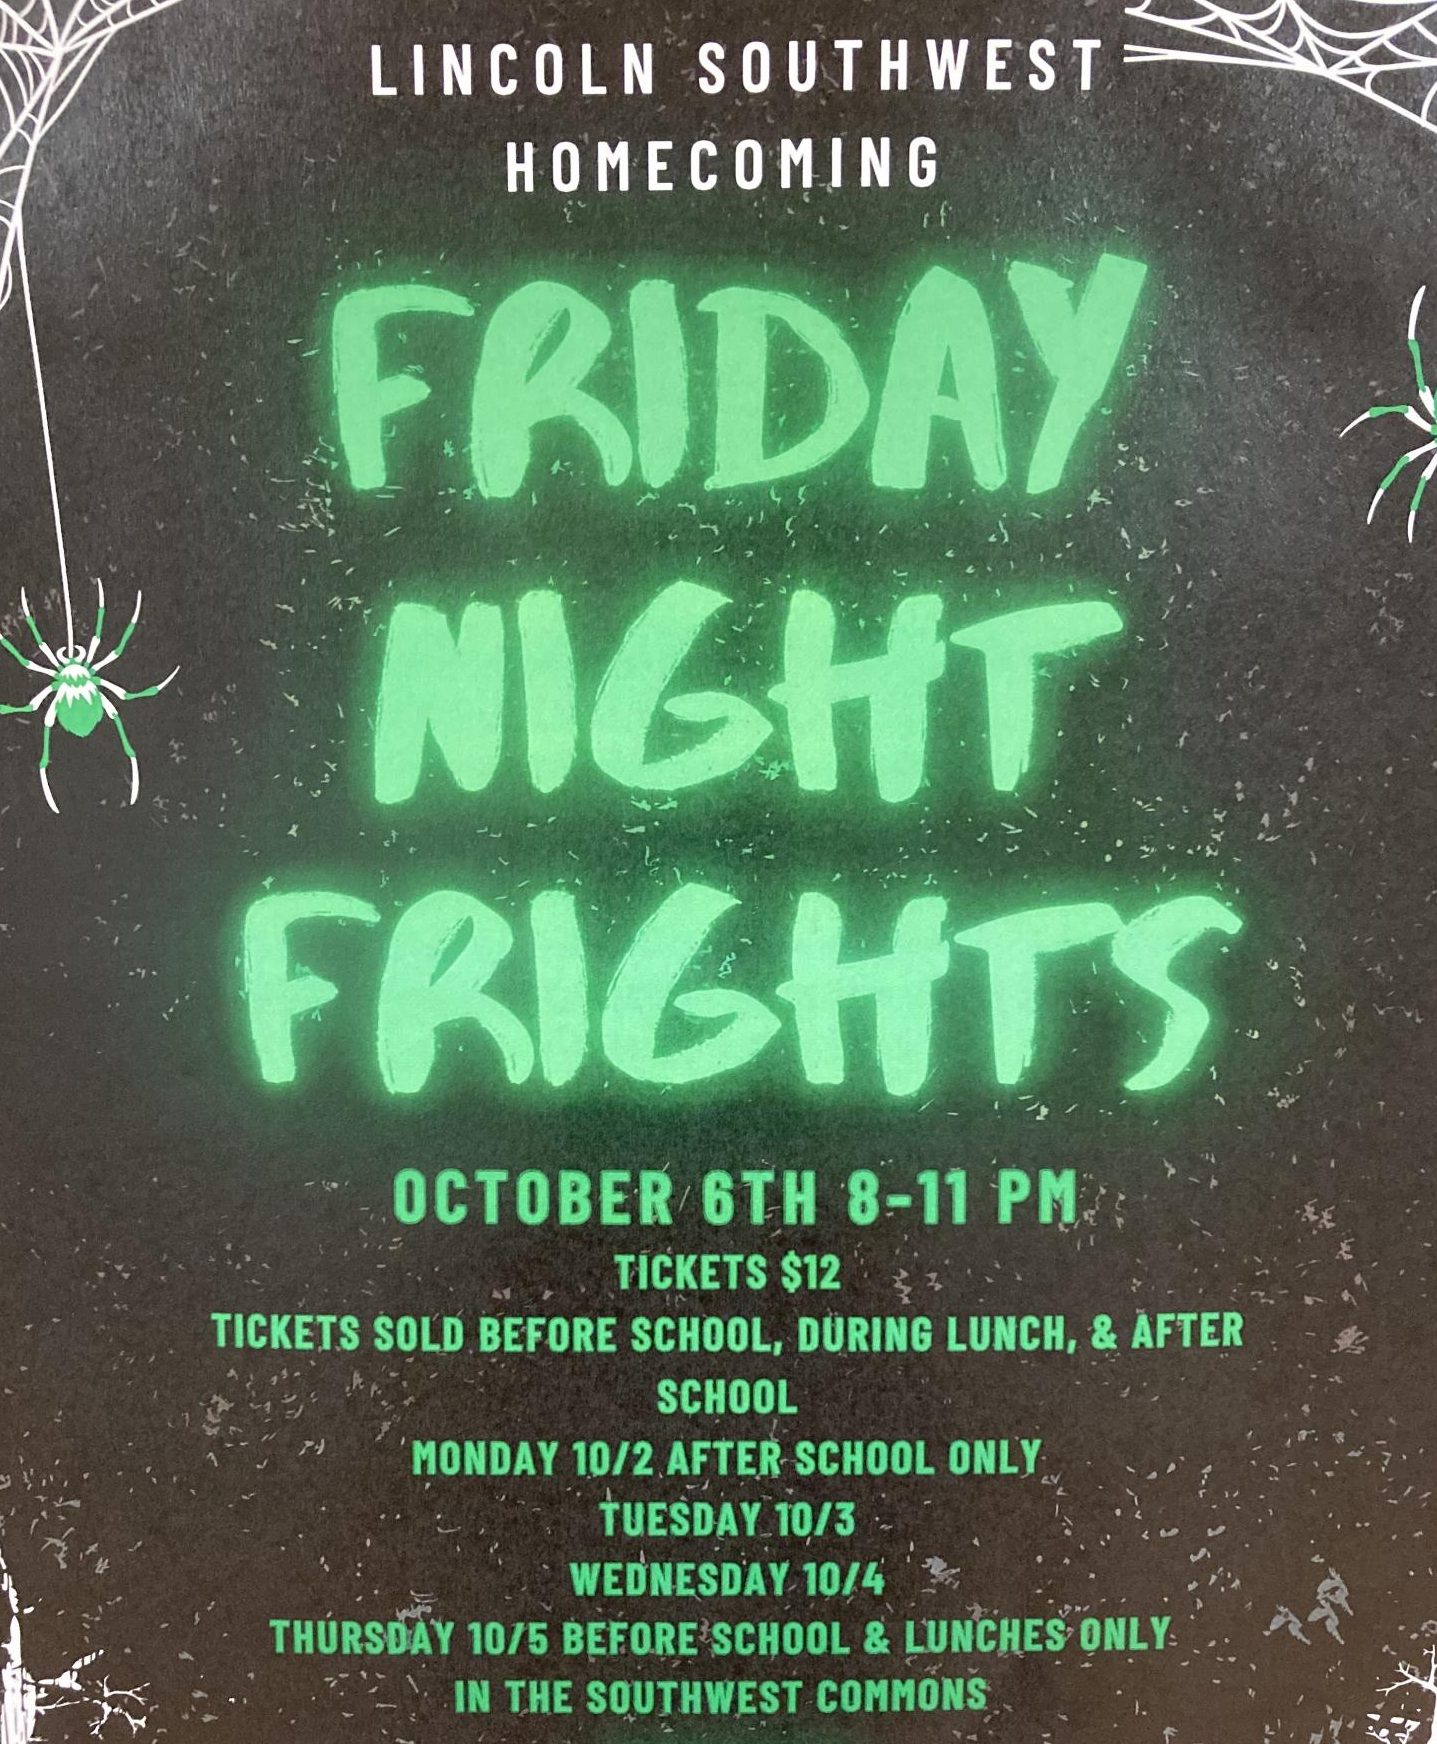 On Friday, Oct. 6, the Homecoming dance starts at 8 p.m. and ends at 11 p.m. Tickets will be sold throughout next week by the varsity cheer squad. 